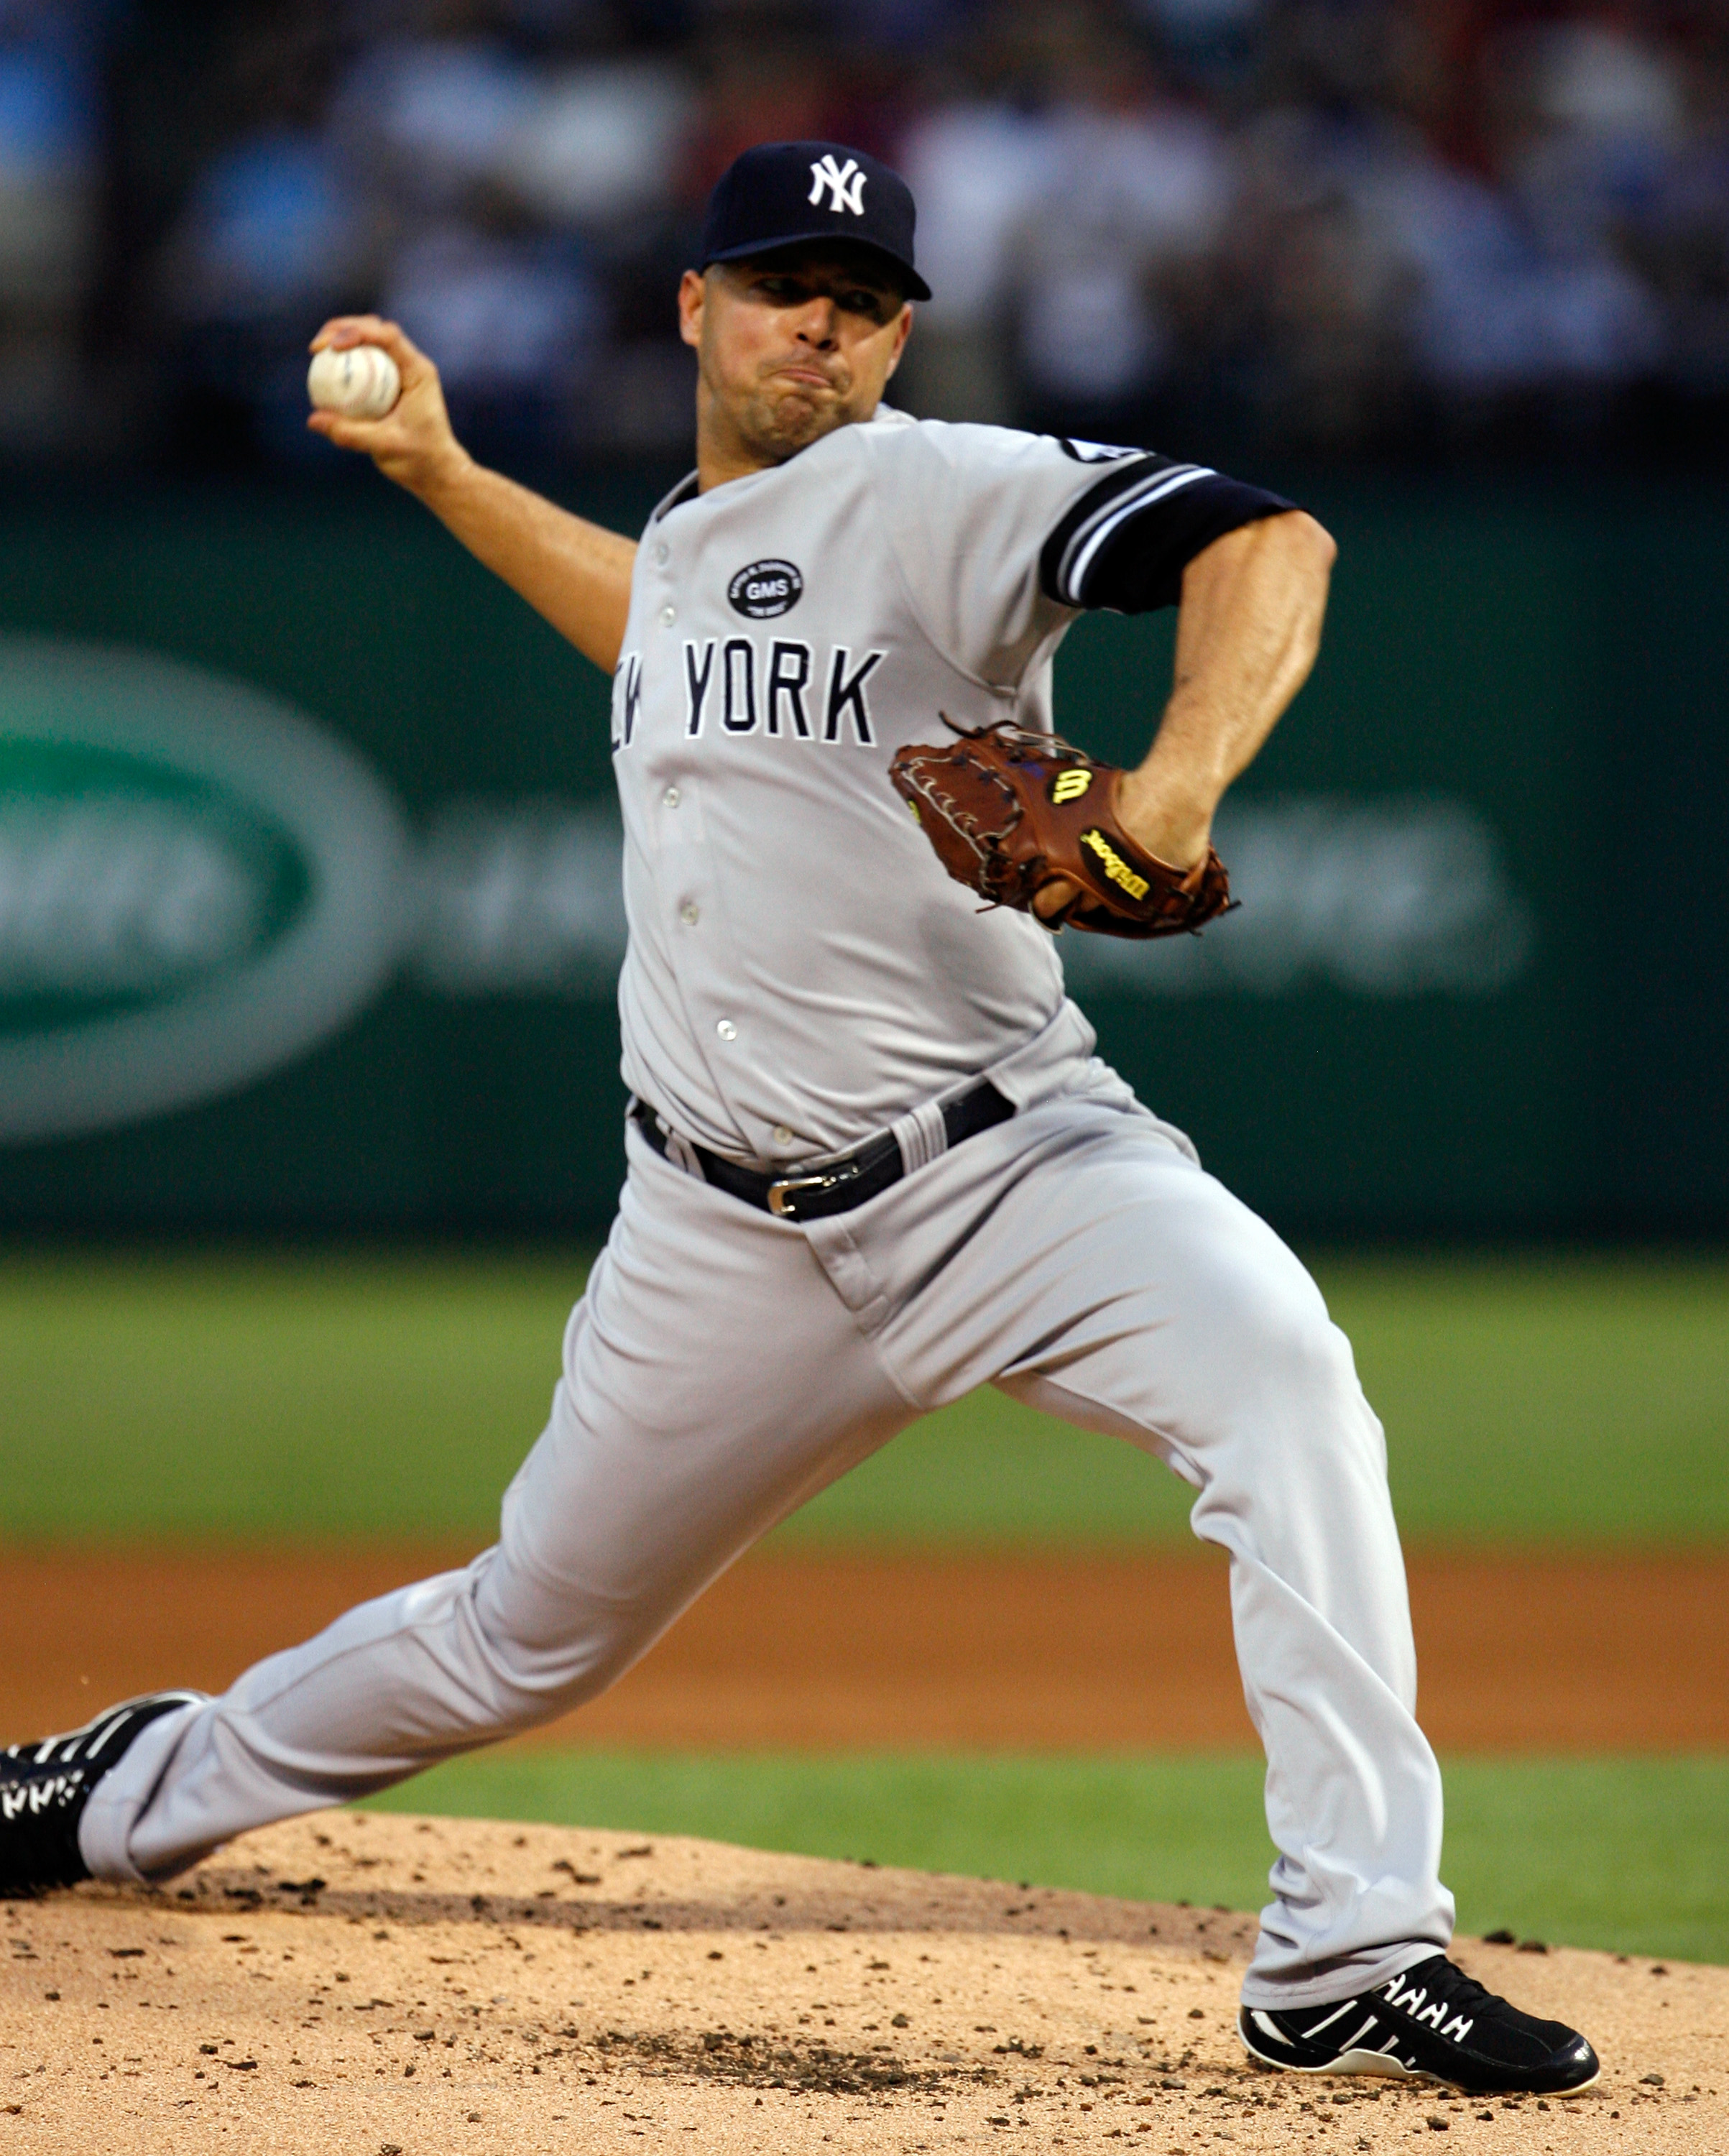 ARLINGTON, TX - SEPTEMBER 10:  Starting pitcher Javier Vasquez #31 of the New York Yankees pitches against the Texas Rangers on September 10, 2010 at Rangers Ballpark in Arlington, Texas.  (Photo by Tom Pennington/Getty Images)